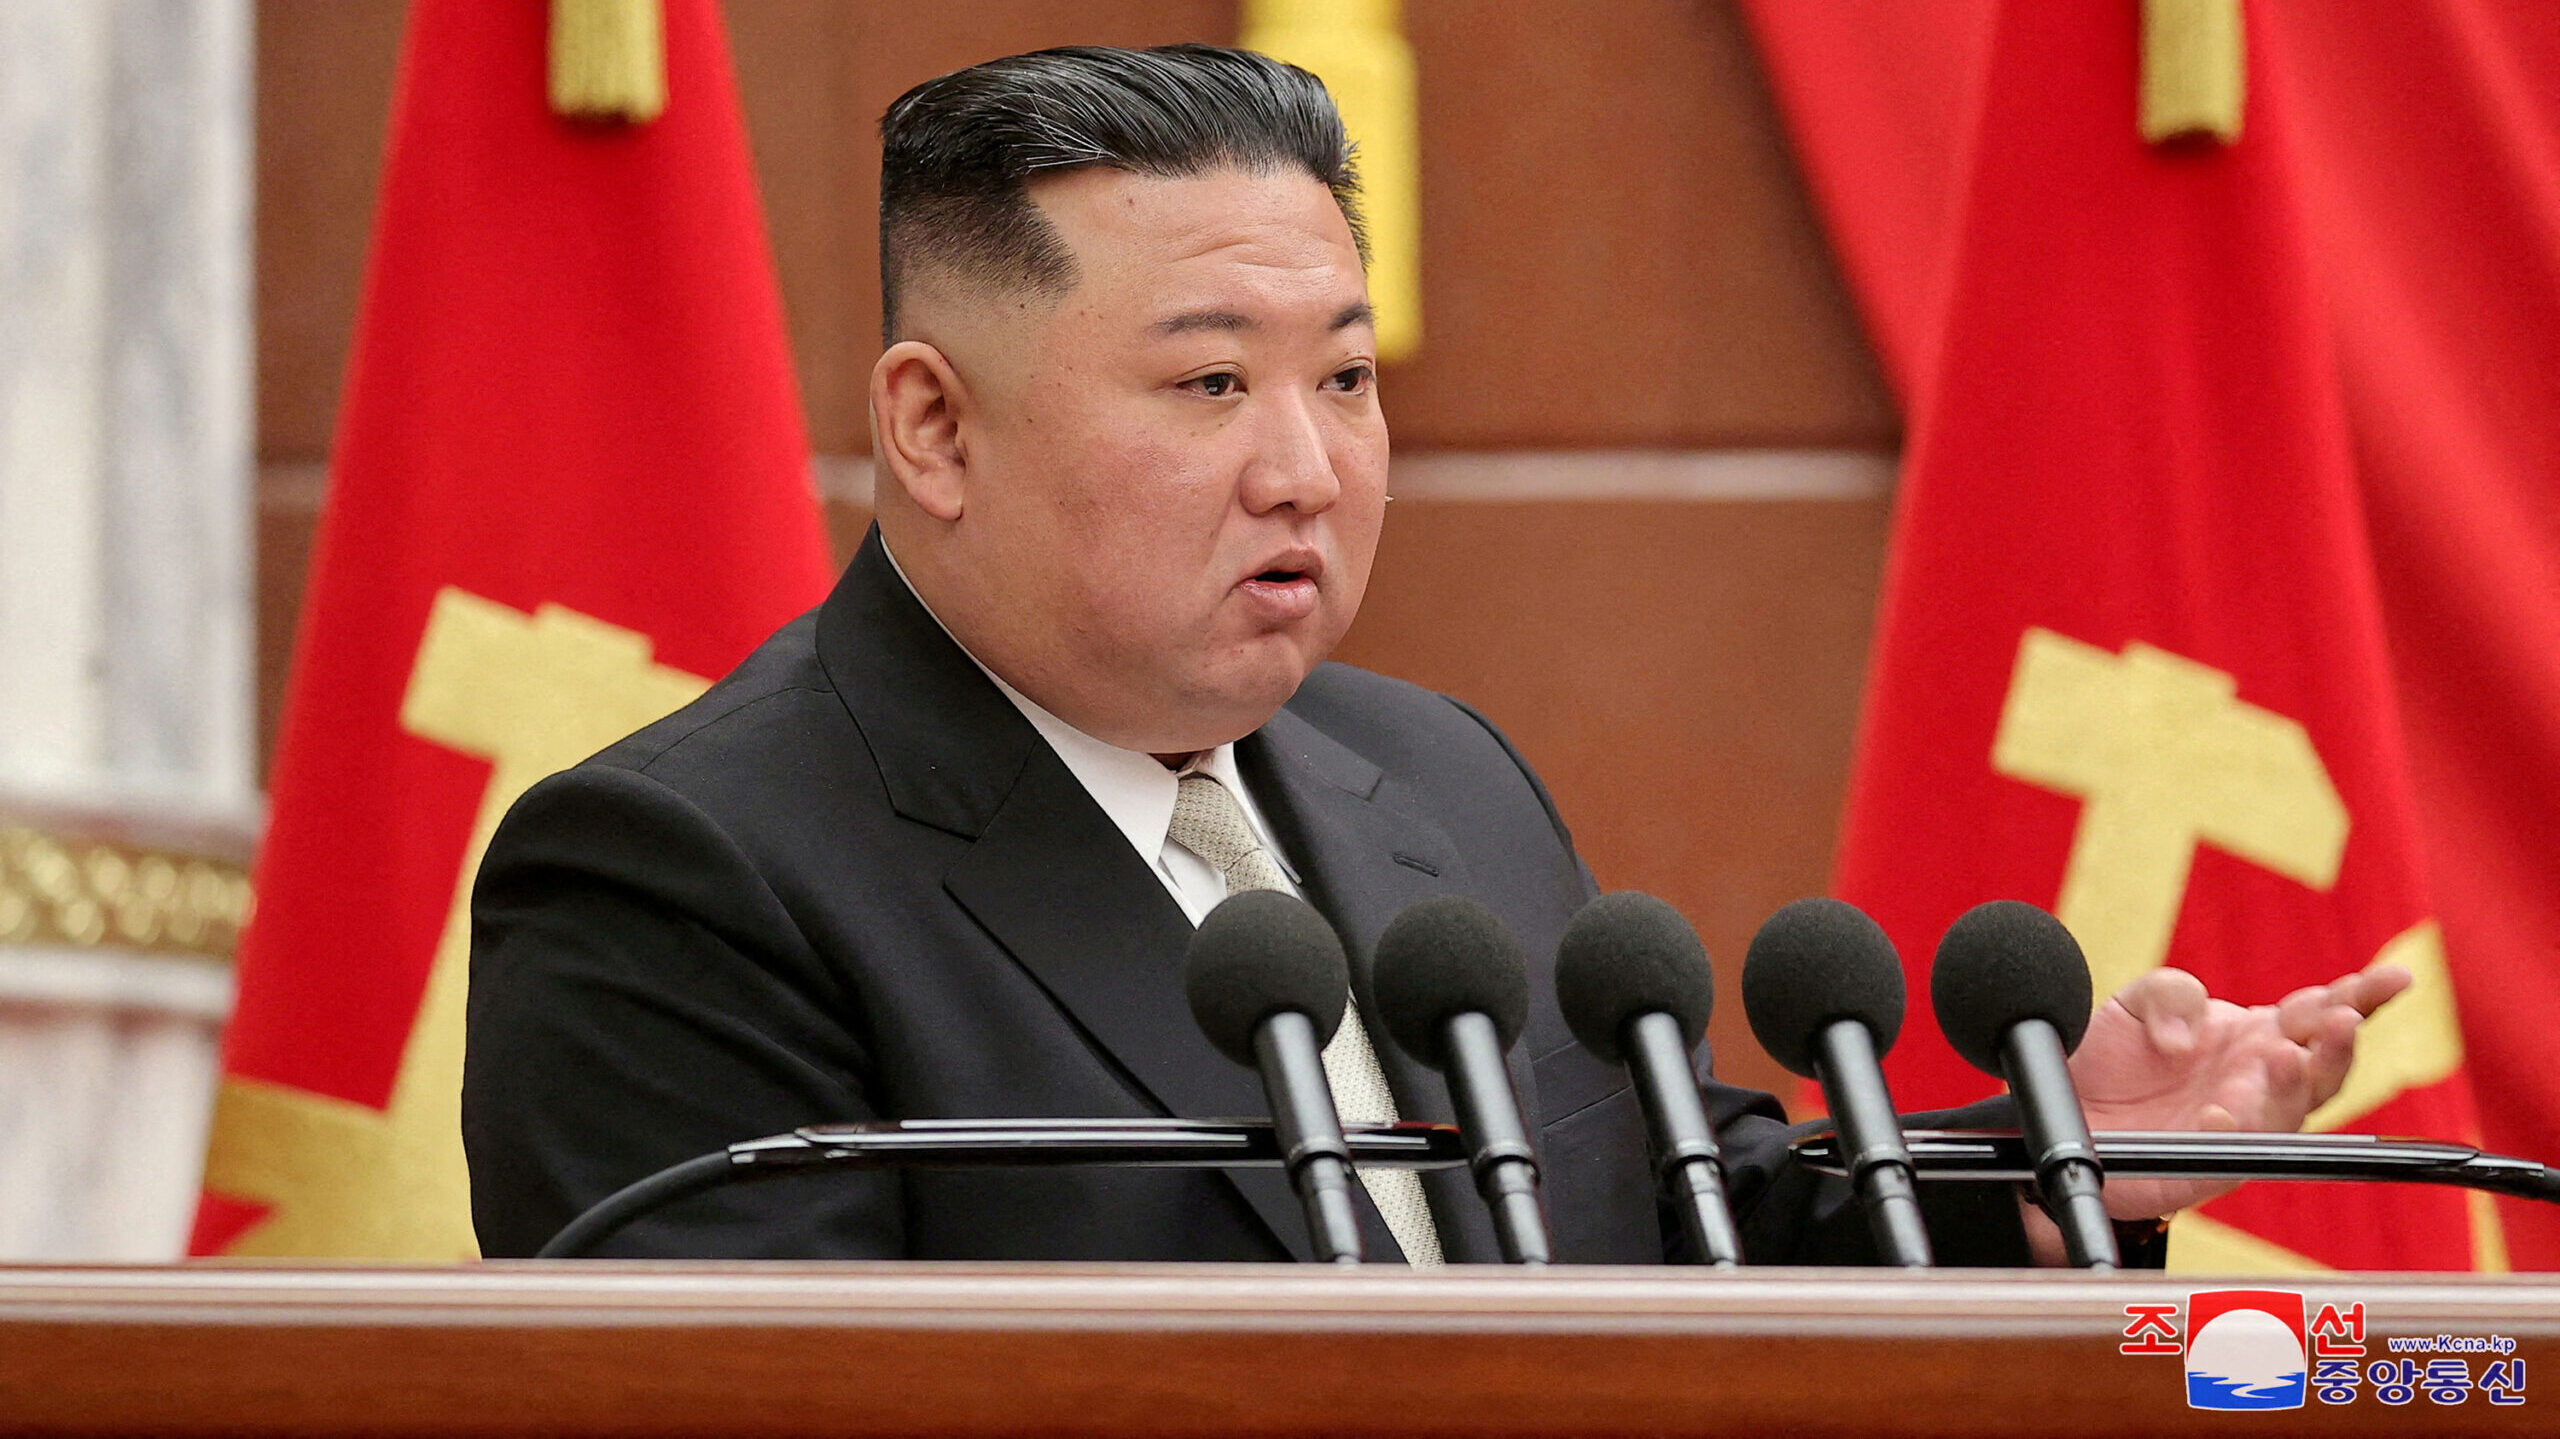 North Korean leader Kim Jong Un attends a meeting in Pyongyang, North Korea, on March 1 in this pho...